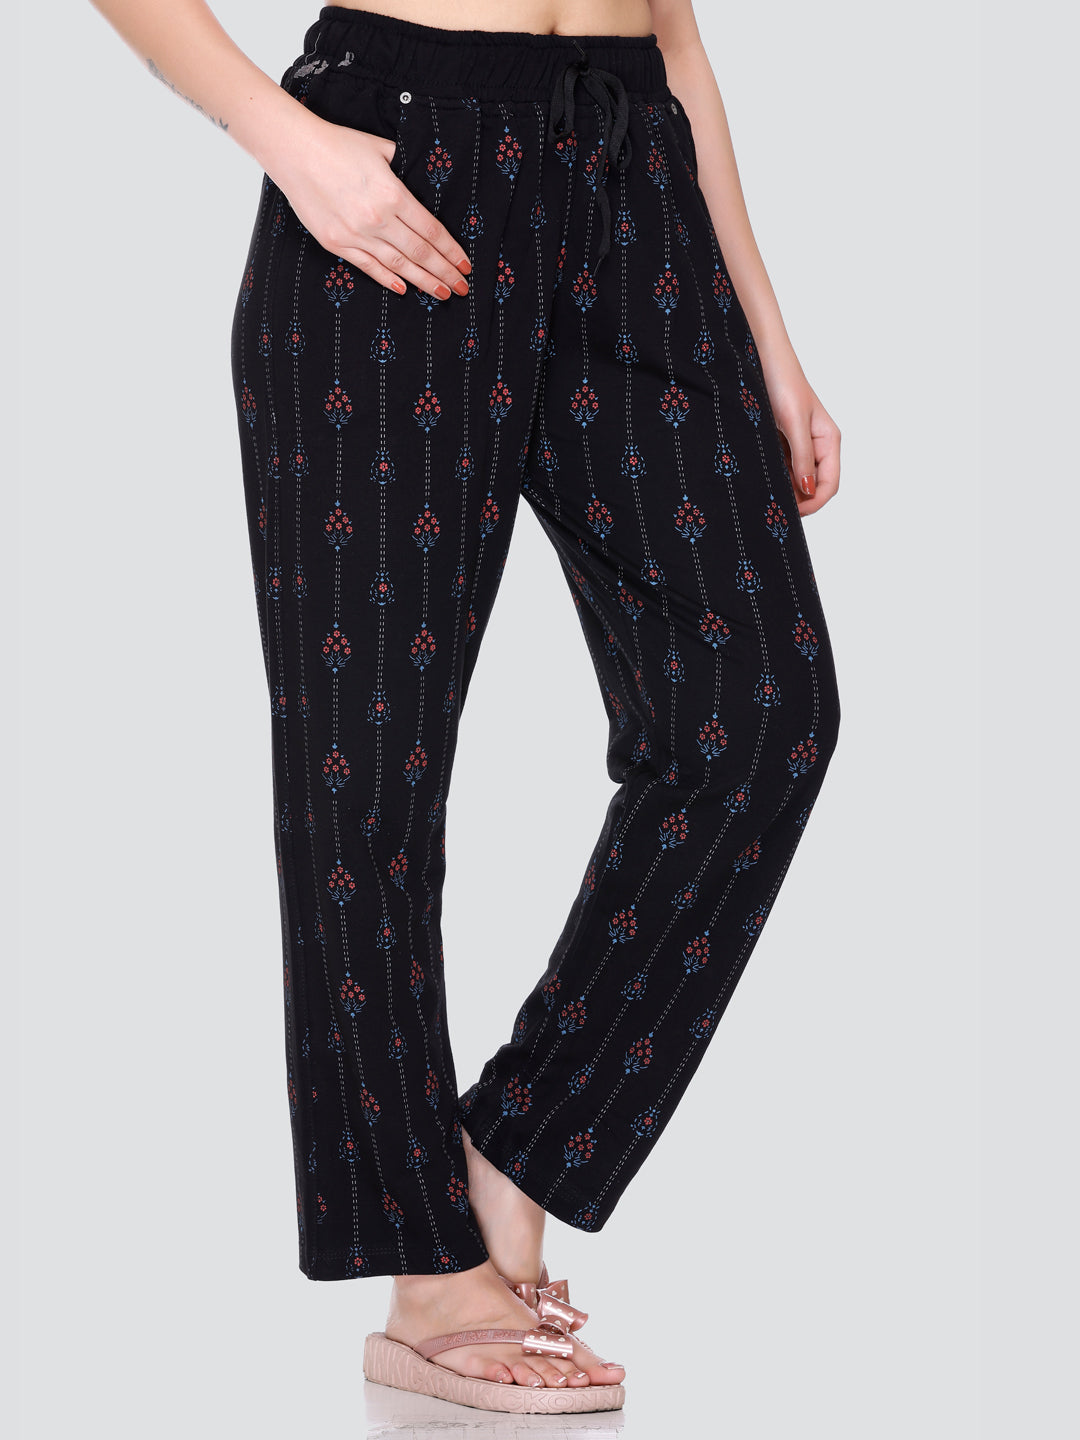 SUIQU Pants for Women, Casual Summer Plus Size High India | Ubuy